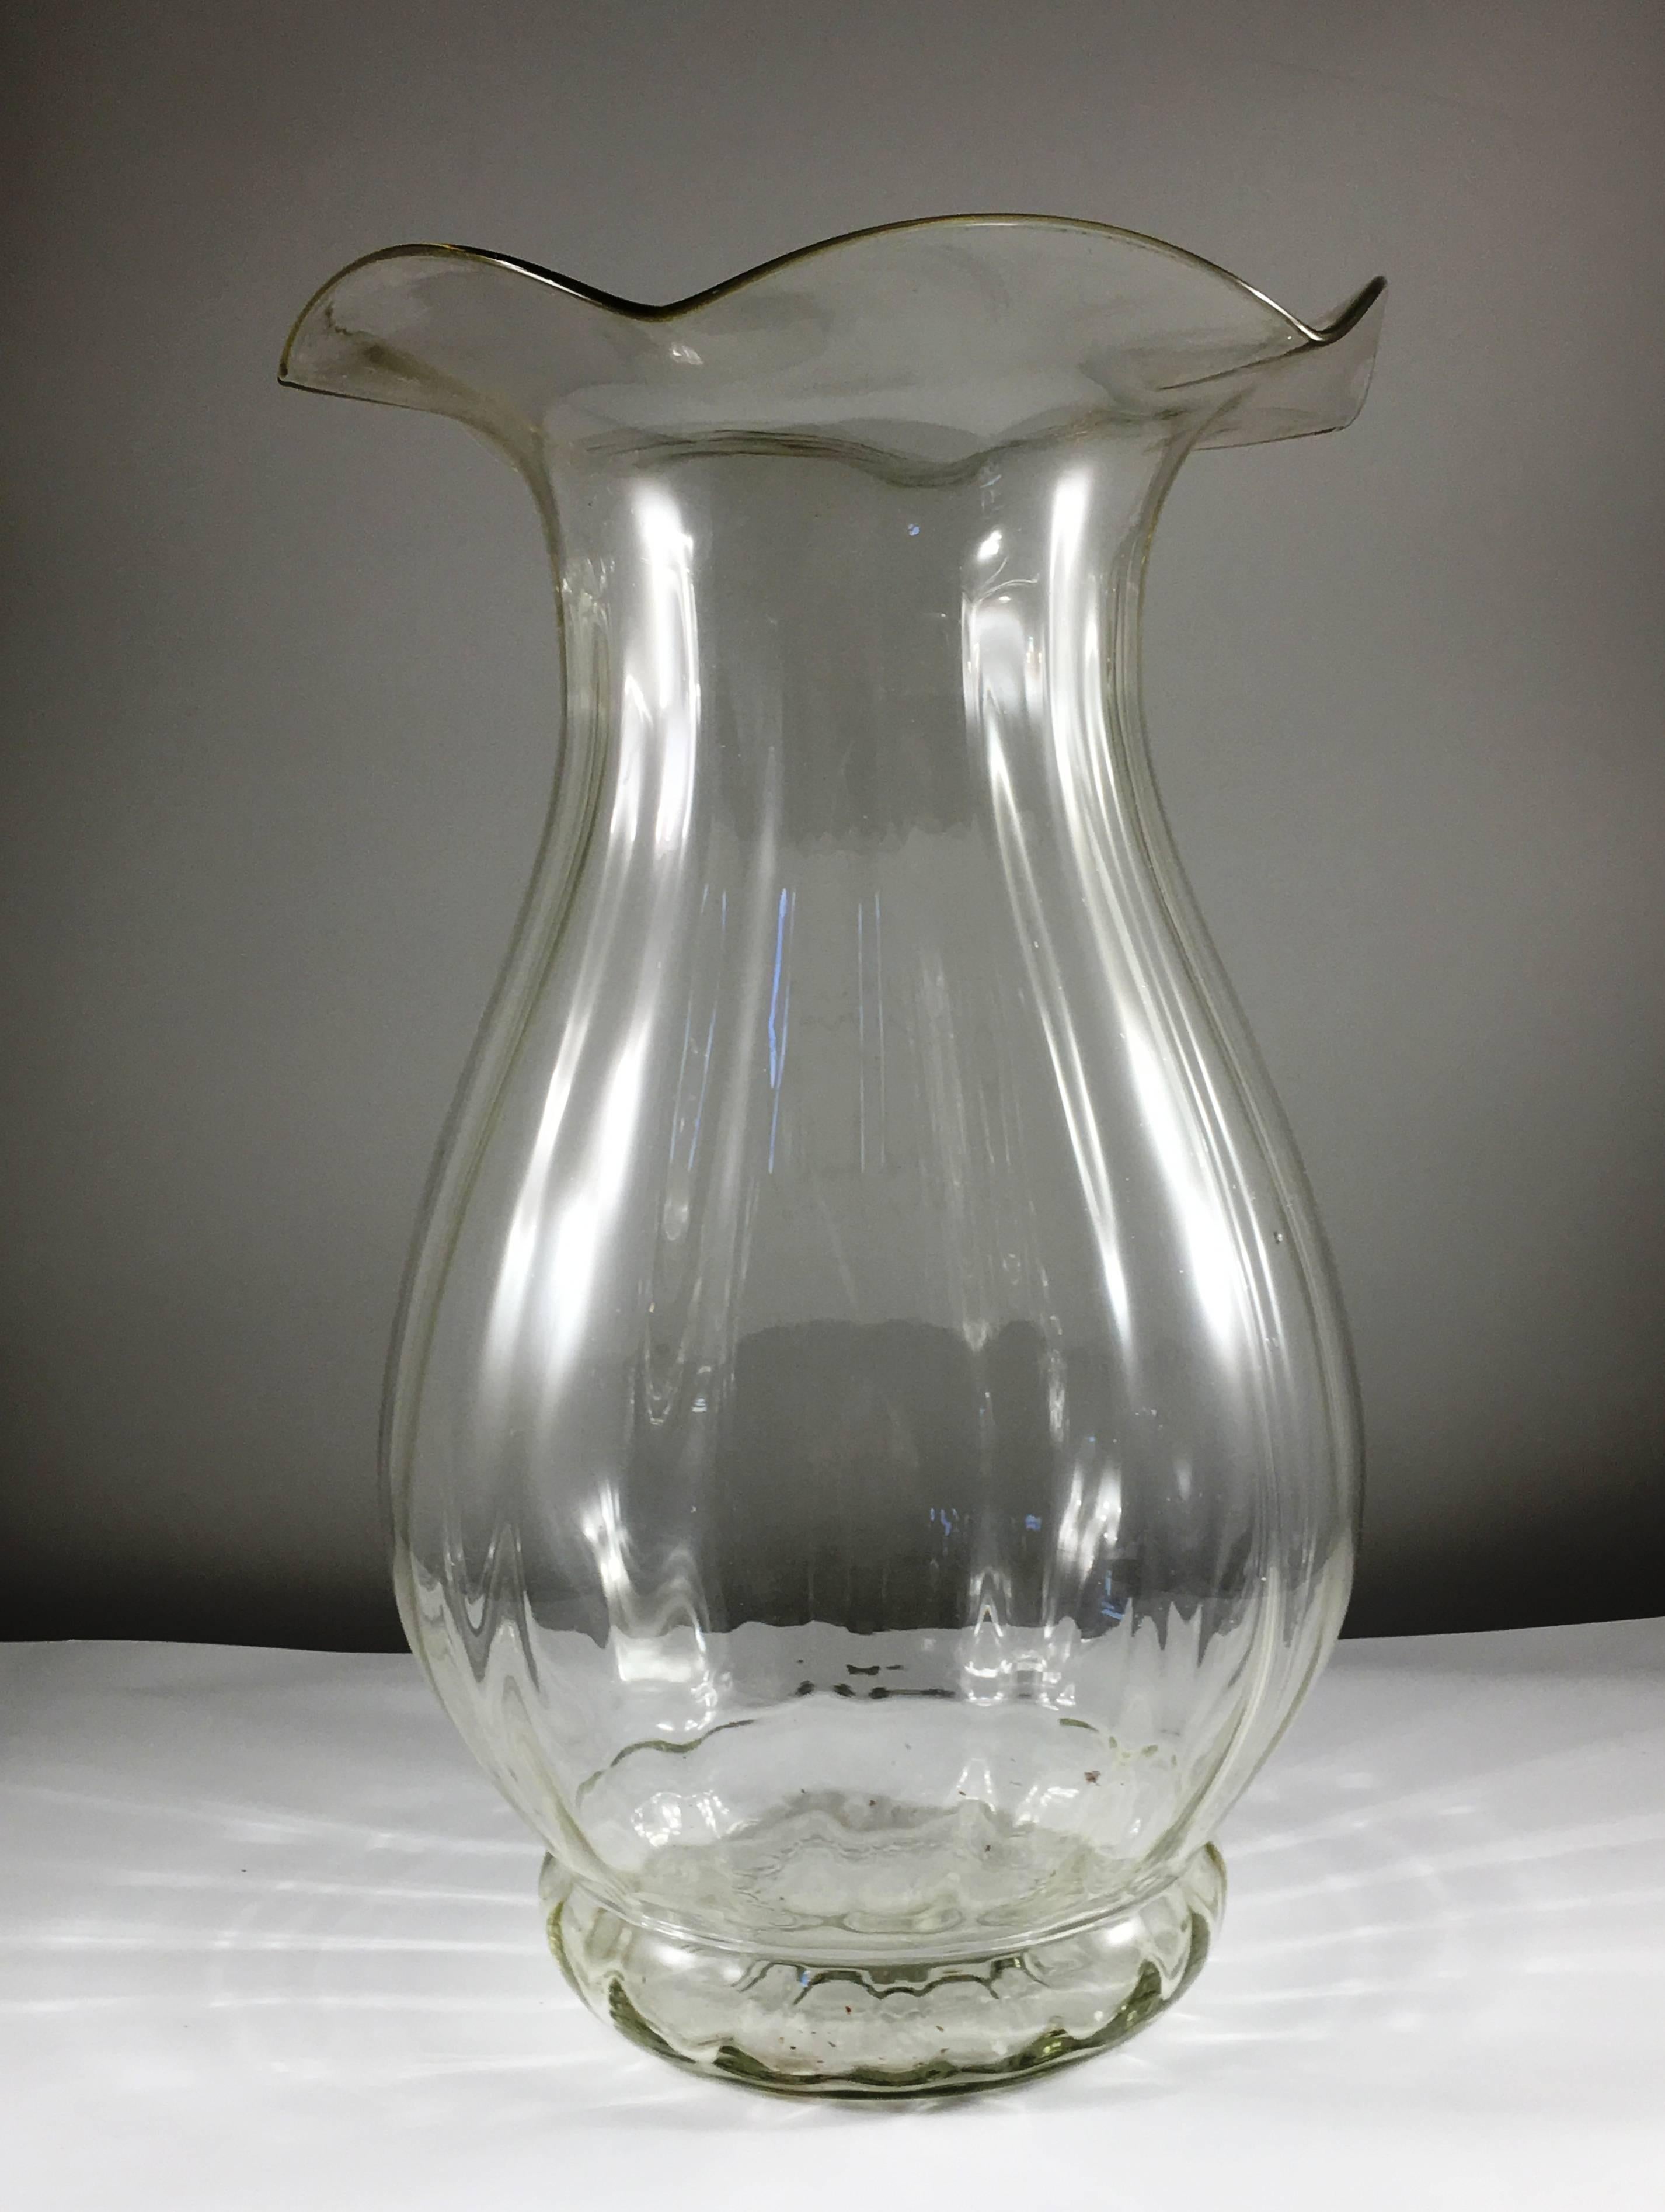 A very large mid-20th century handblown vase in clear glass, circa 1940, American, with petal form top and ribbed body.